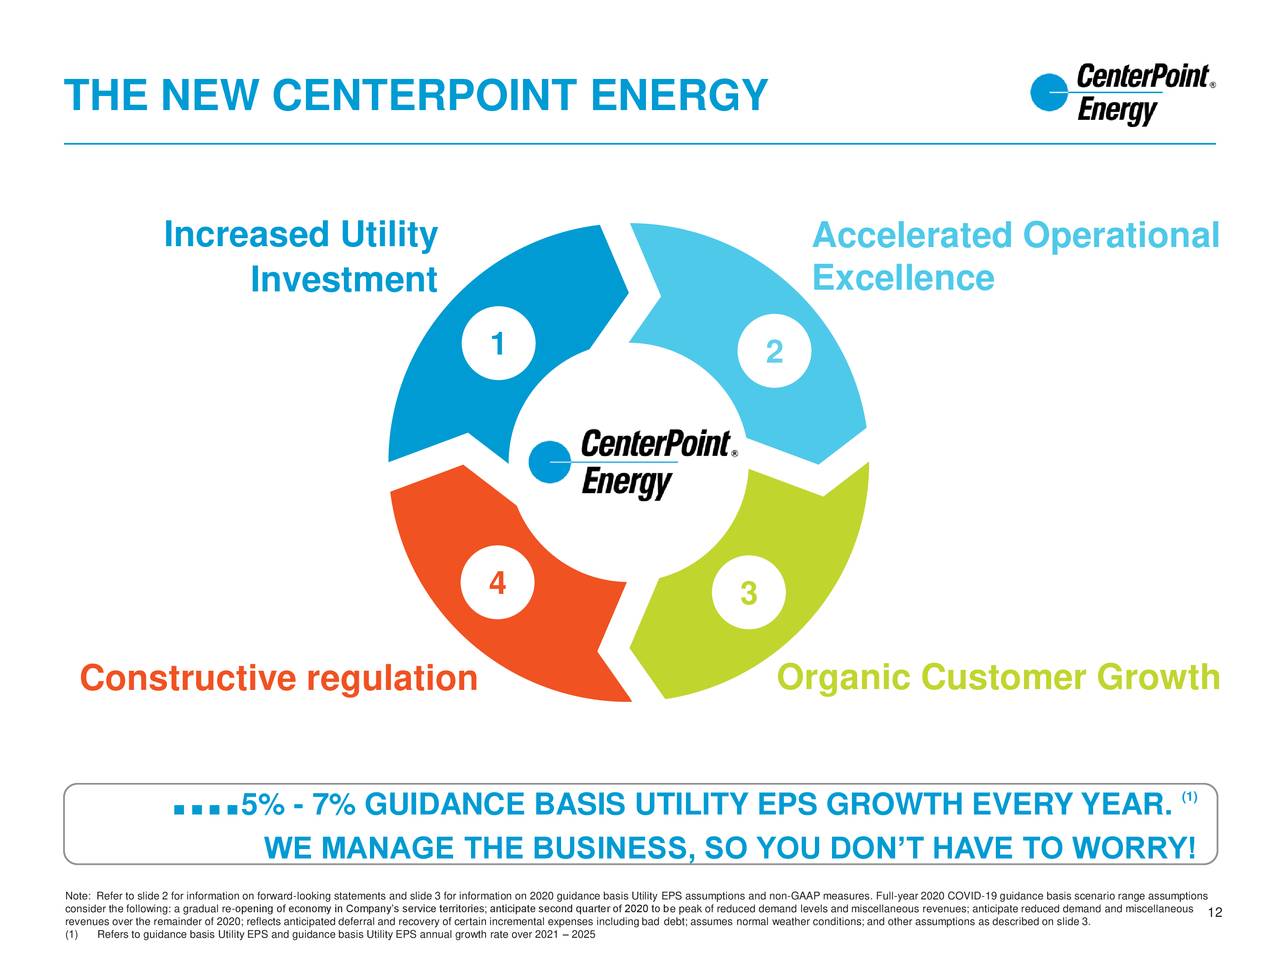 CenterPoint Energy, Inc. 2020 Q3 Results Earnings Call Presentation